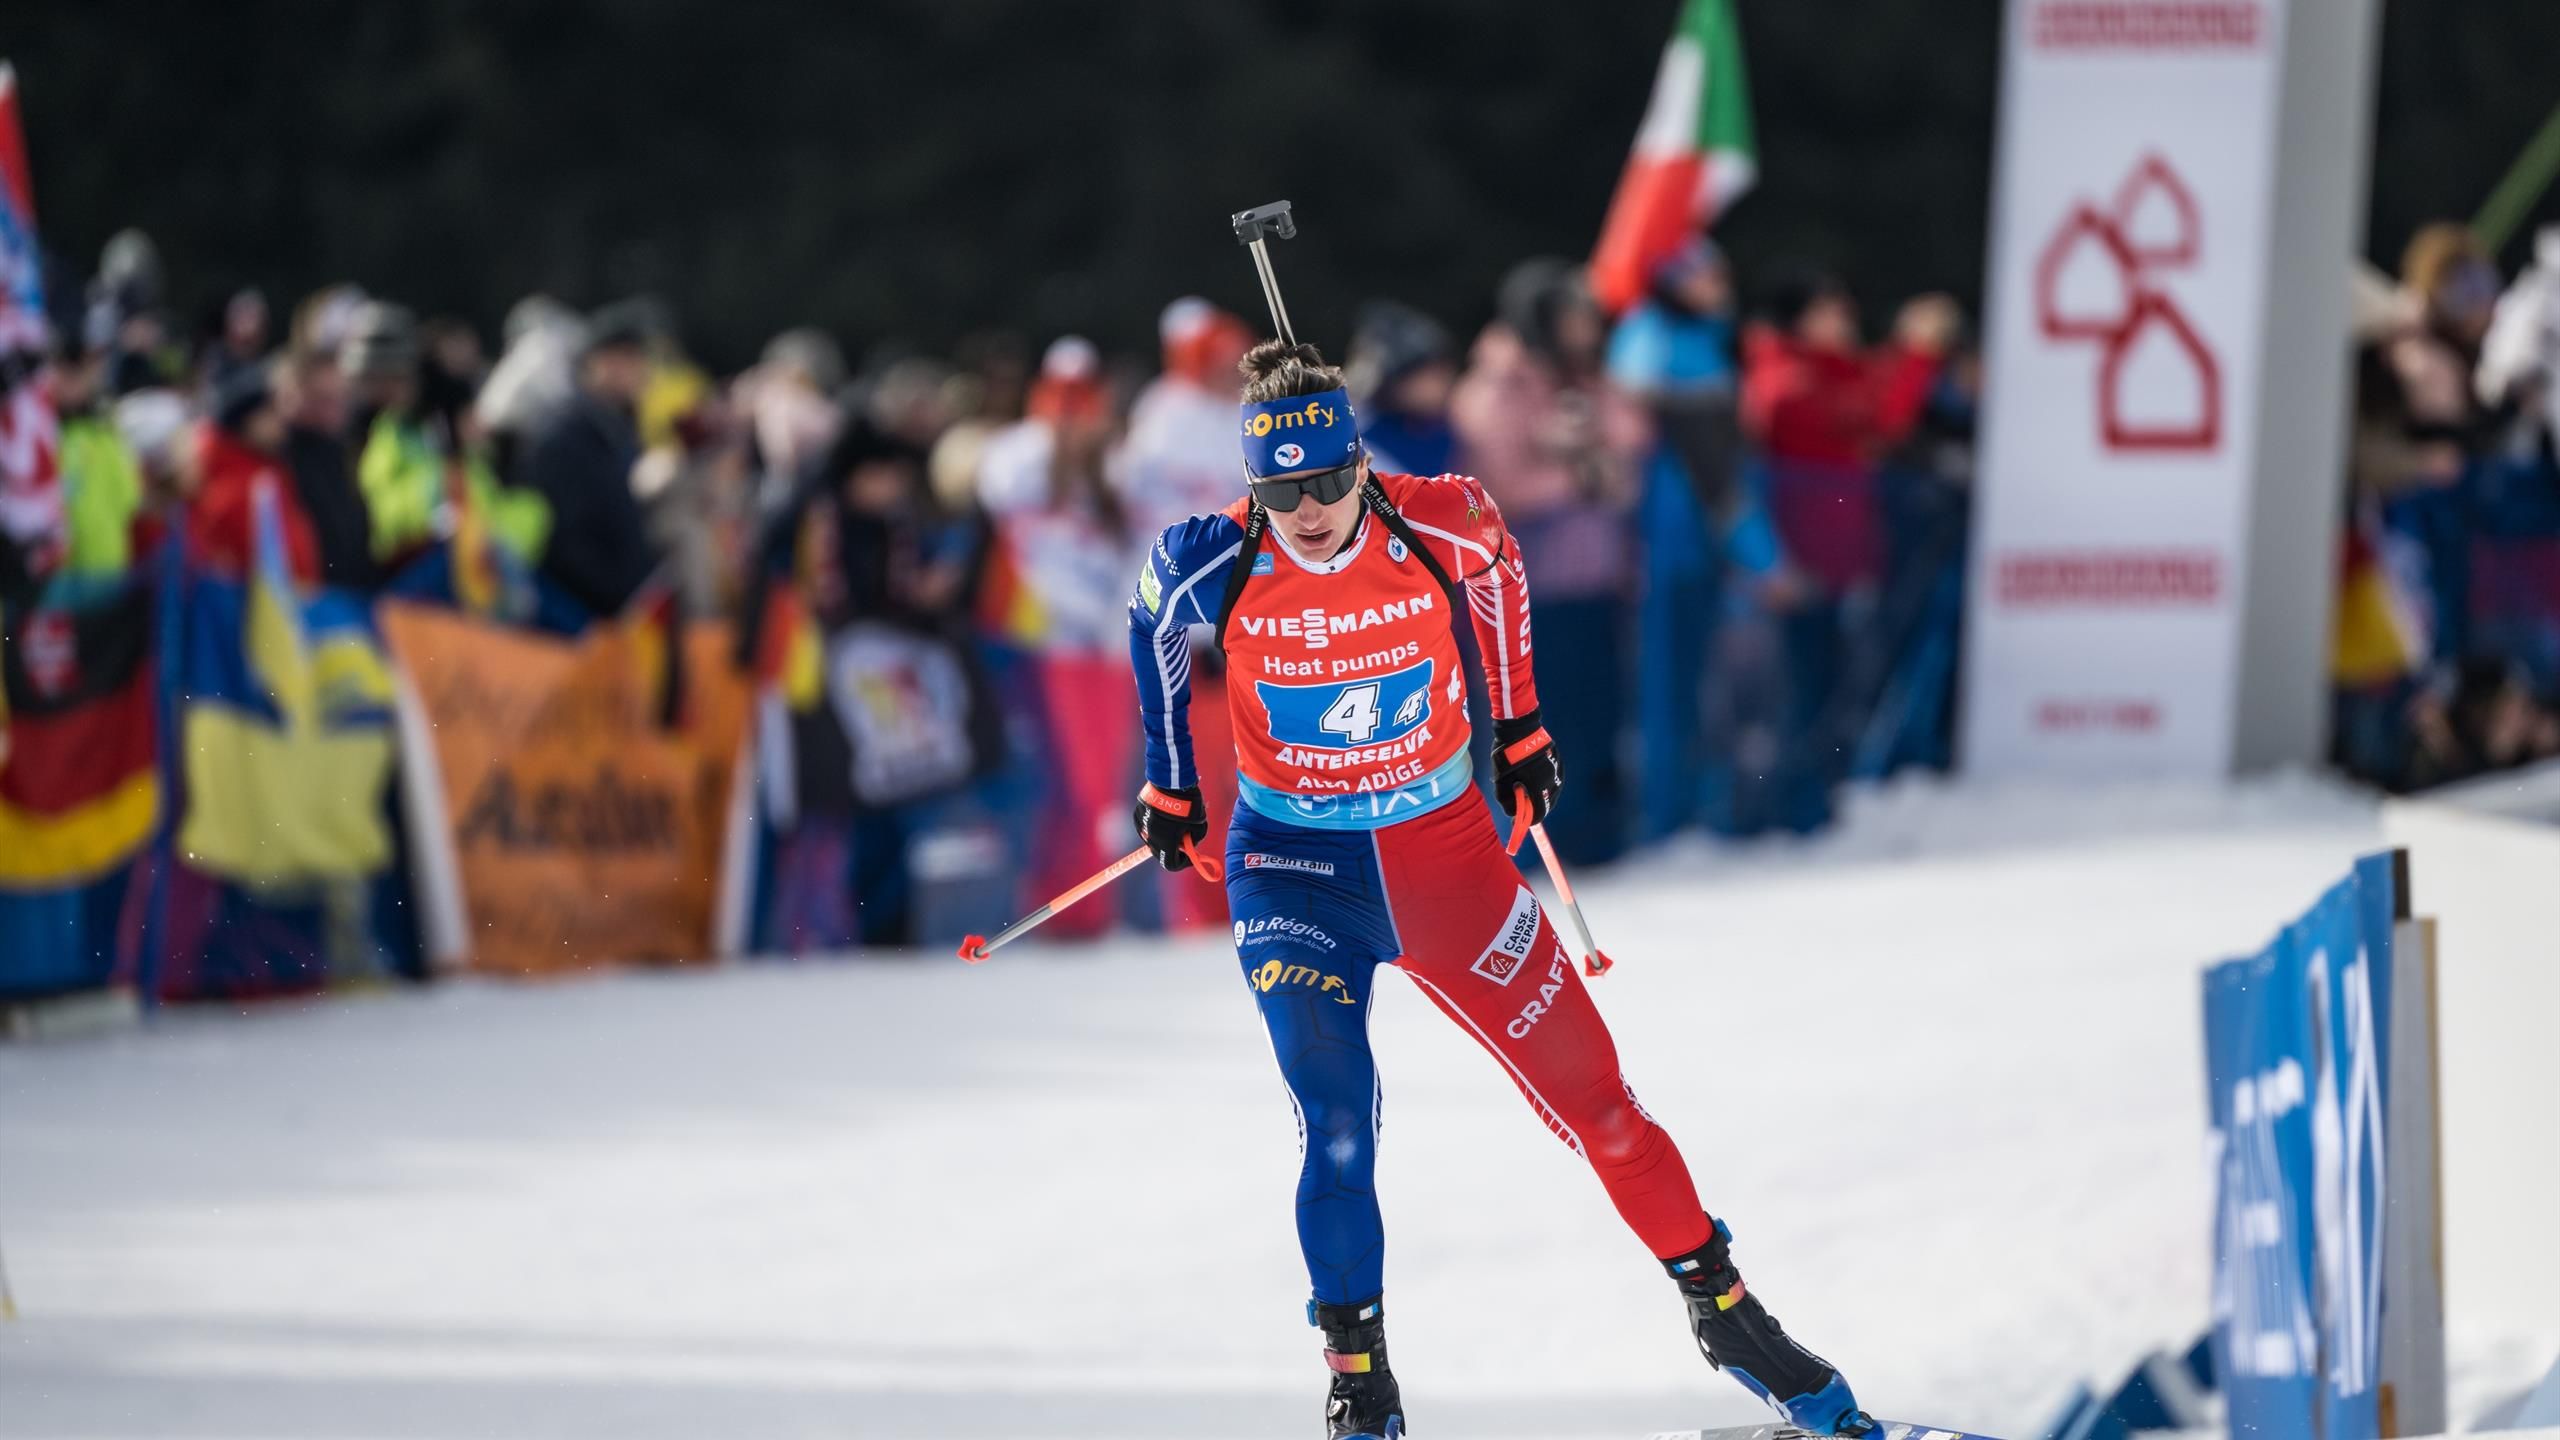 France dominate but Norway also strike gold in Biathlon World Cup